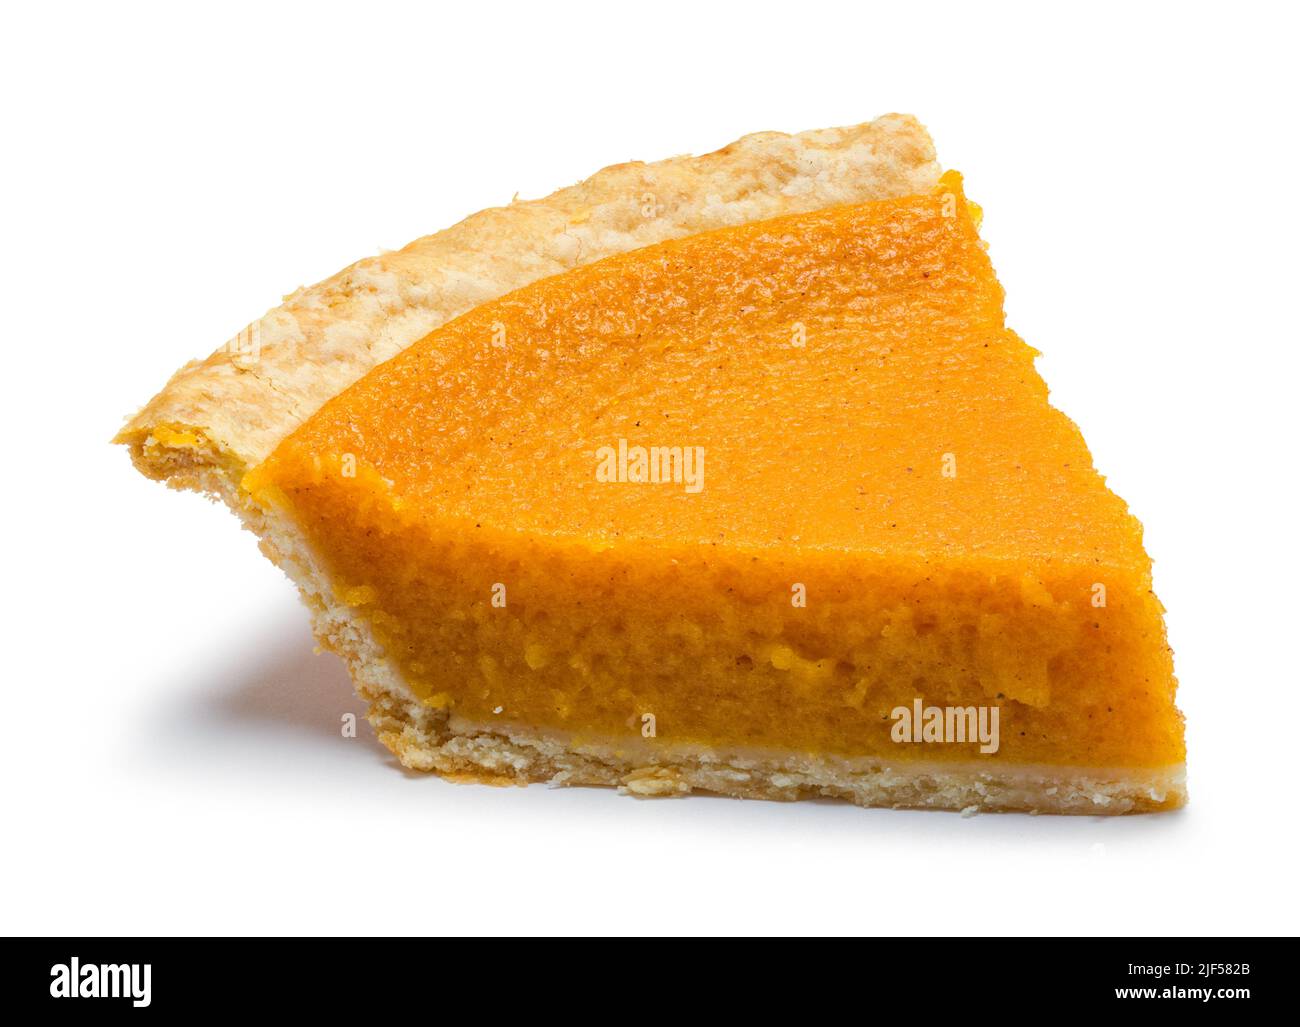 Slice of Pumpkin Pie Cut Out on White. Stock Photo